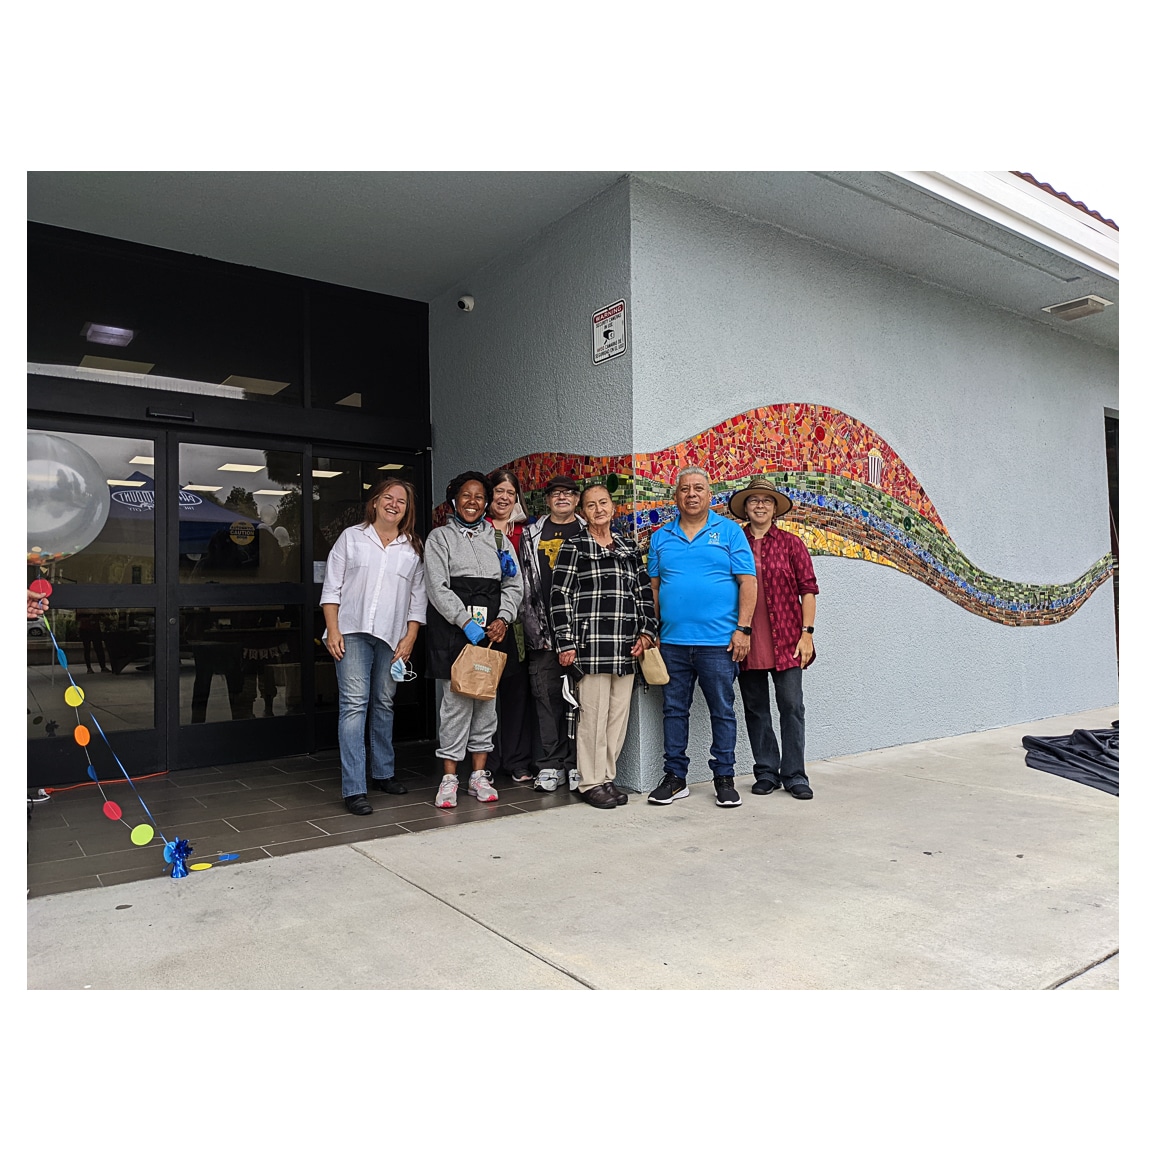 Los Angeles mosaic arts nonprofit Piece by Piece in front of mural ig